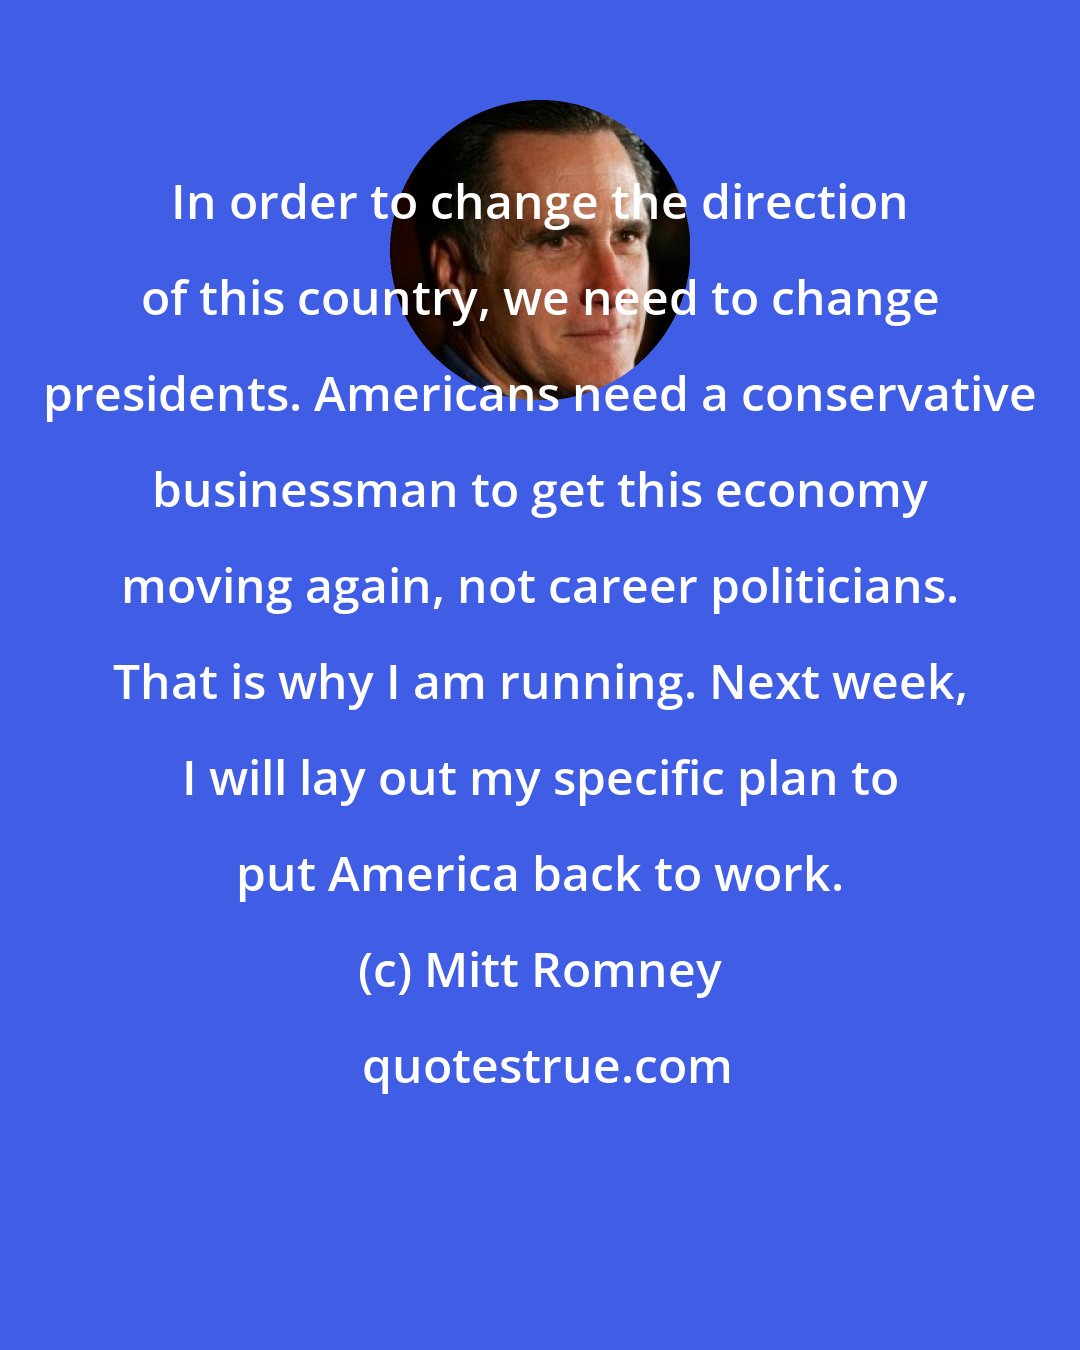 Mitt Romney: In order to change the direction of this country, we need to change presidents. Americans need a conservative businessman to get this economy moving again, not career politicians. That is why I am running. Next week, I will lay out my specific plan to put America back to work.